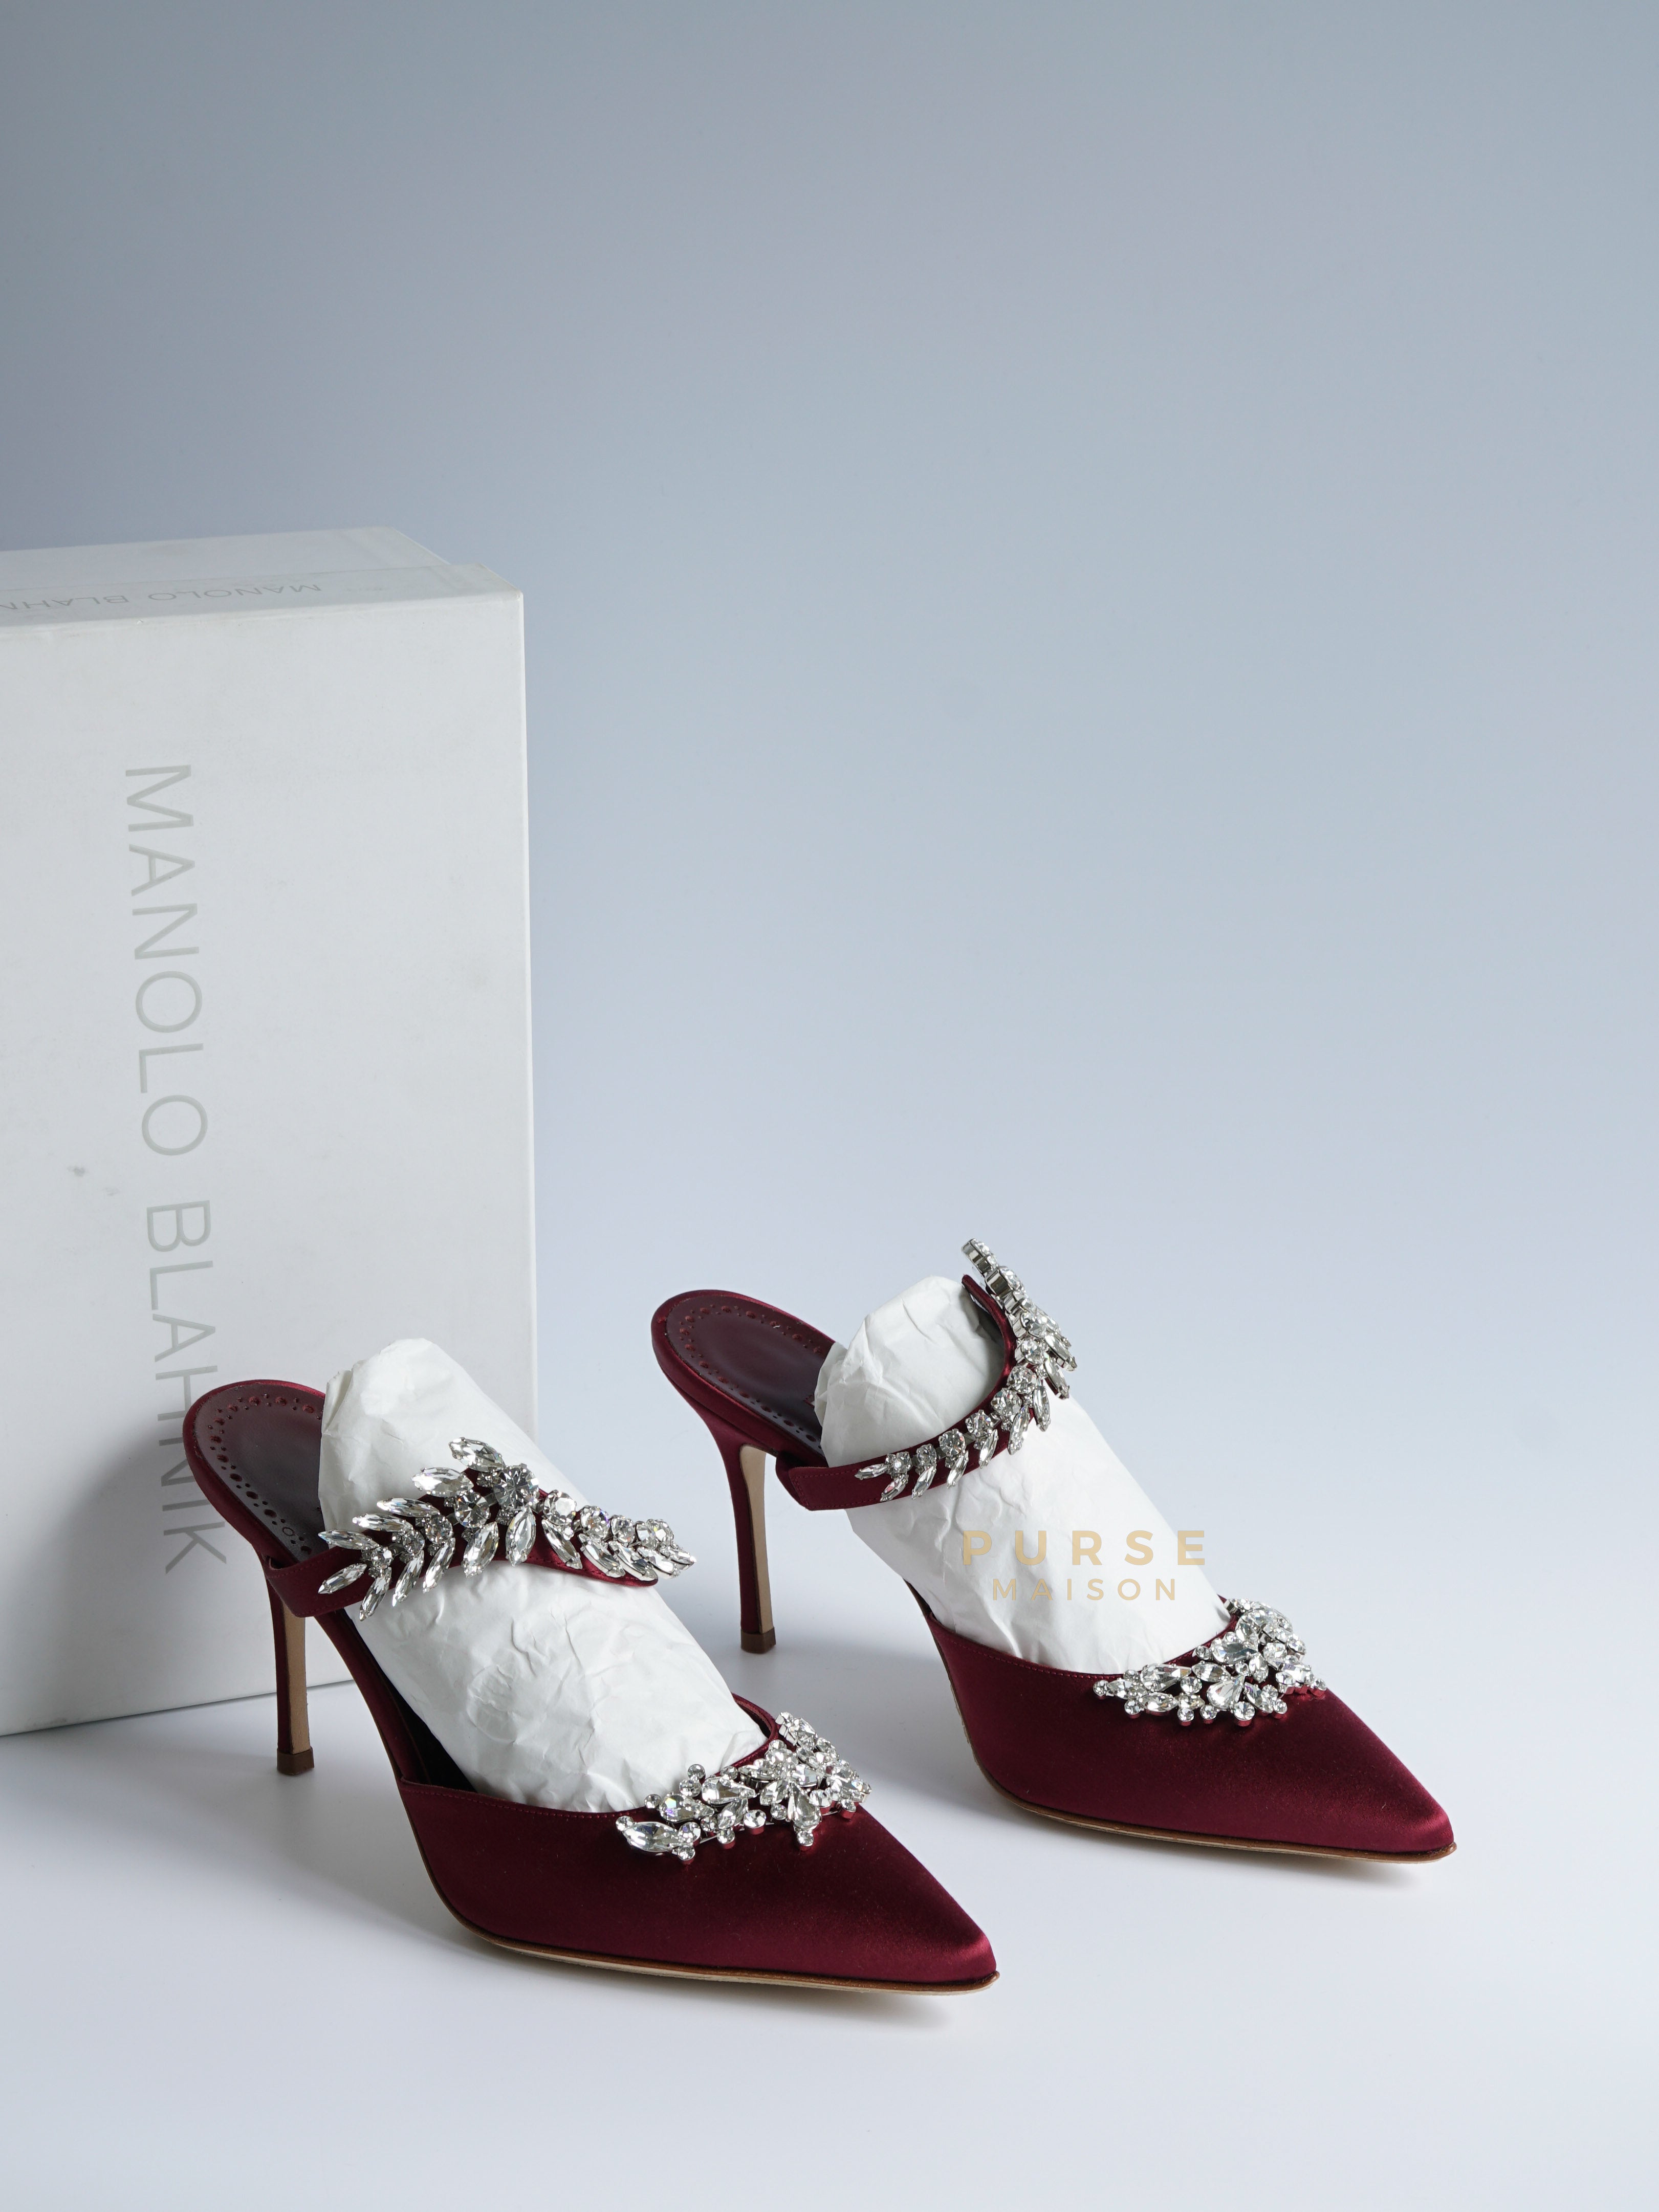 Lurum Crystal Embellished Pointed Toe in Burgundy Satin Sandals Size 39 EUR (26.5cm) | Purse Maison Luxury Bags Shop